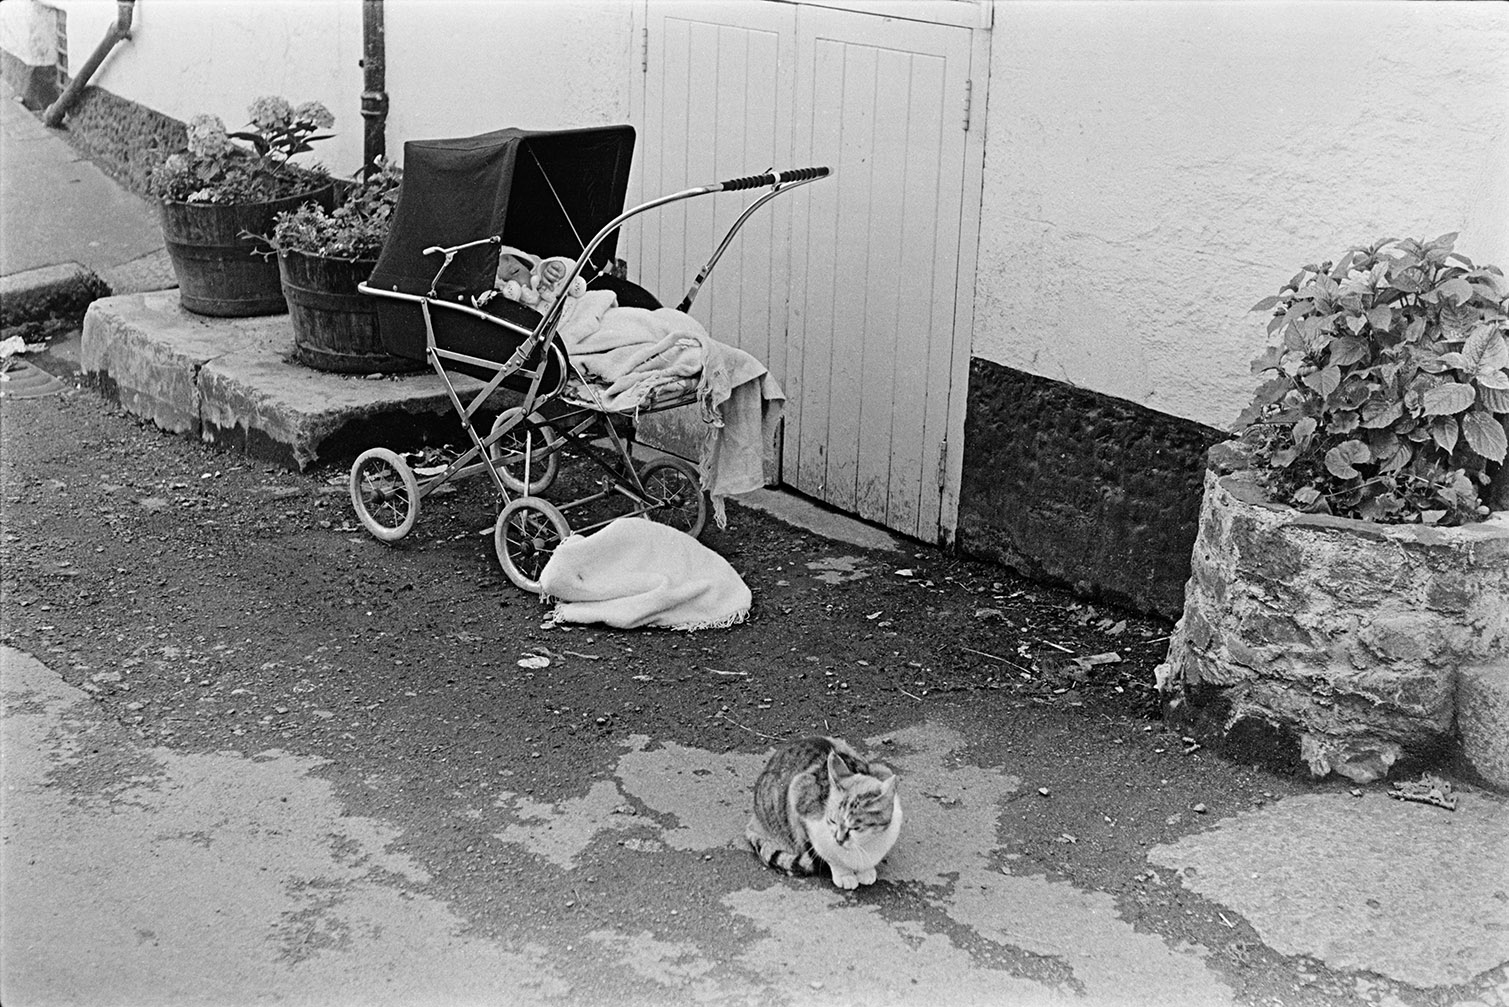 A baby sleeping in a pram and a cat sat nearby on the floor outside a house with flower pots, in Okehampton.